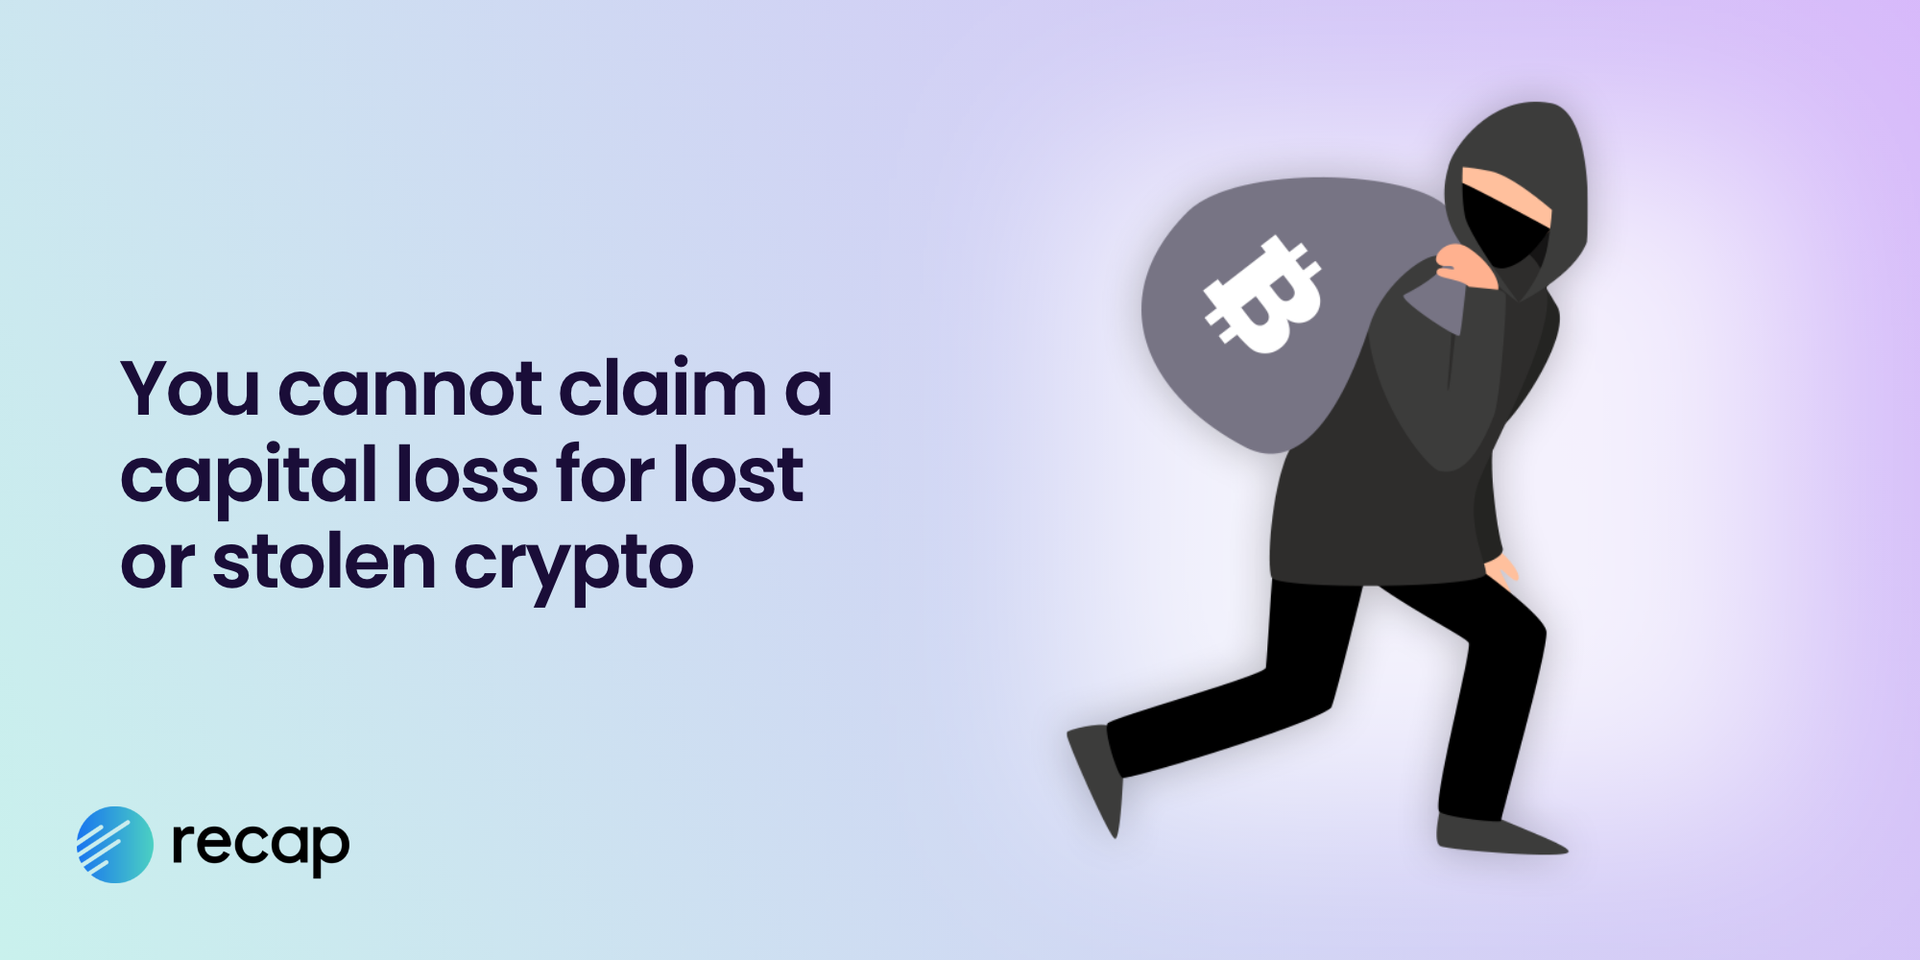 Illustration stating that you cannot claim a capital loss for lost or stolen crypto